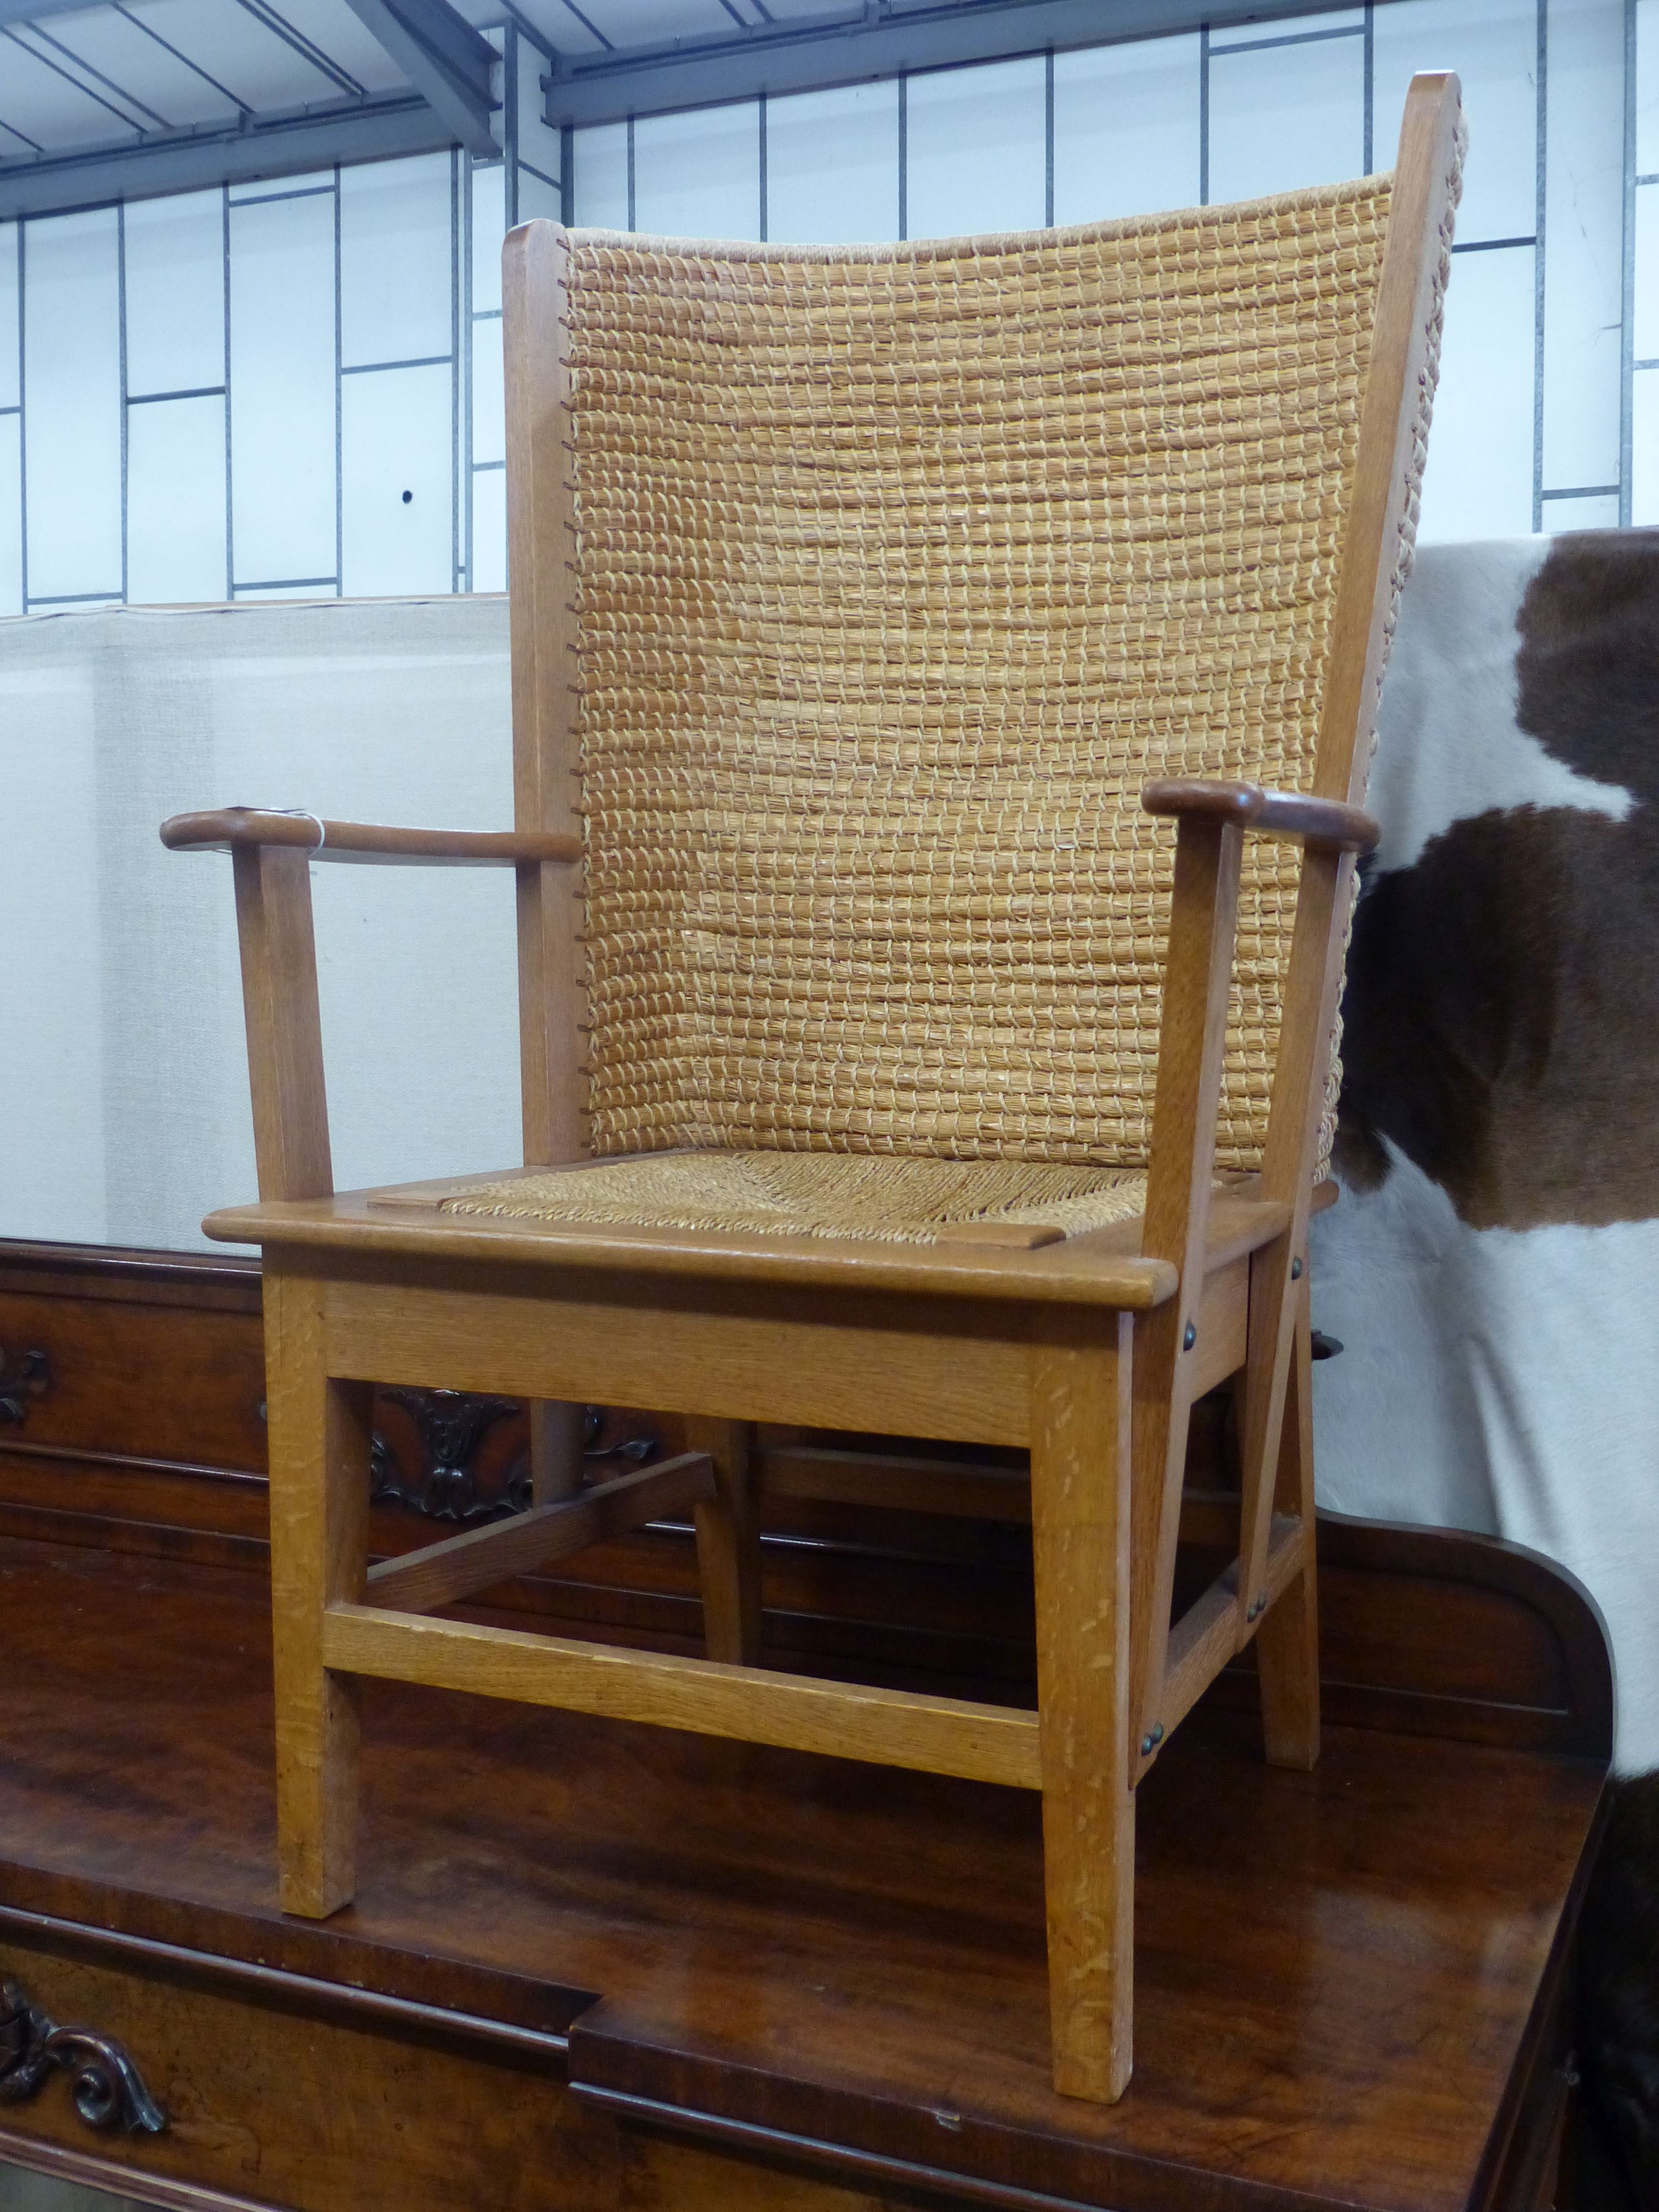 A 20th century light oak and skep work Orkney chair in traditional style, width 63cm, depth 60cm, height 106cm